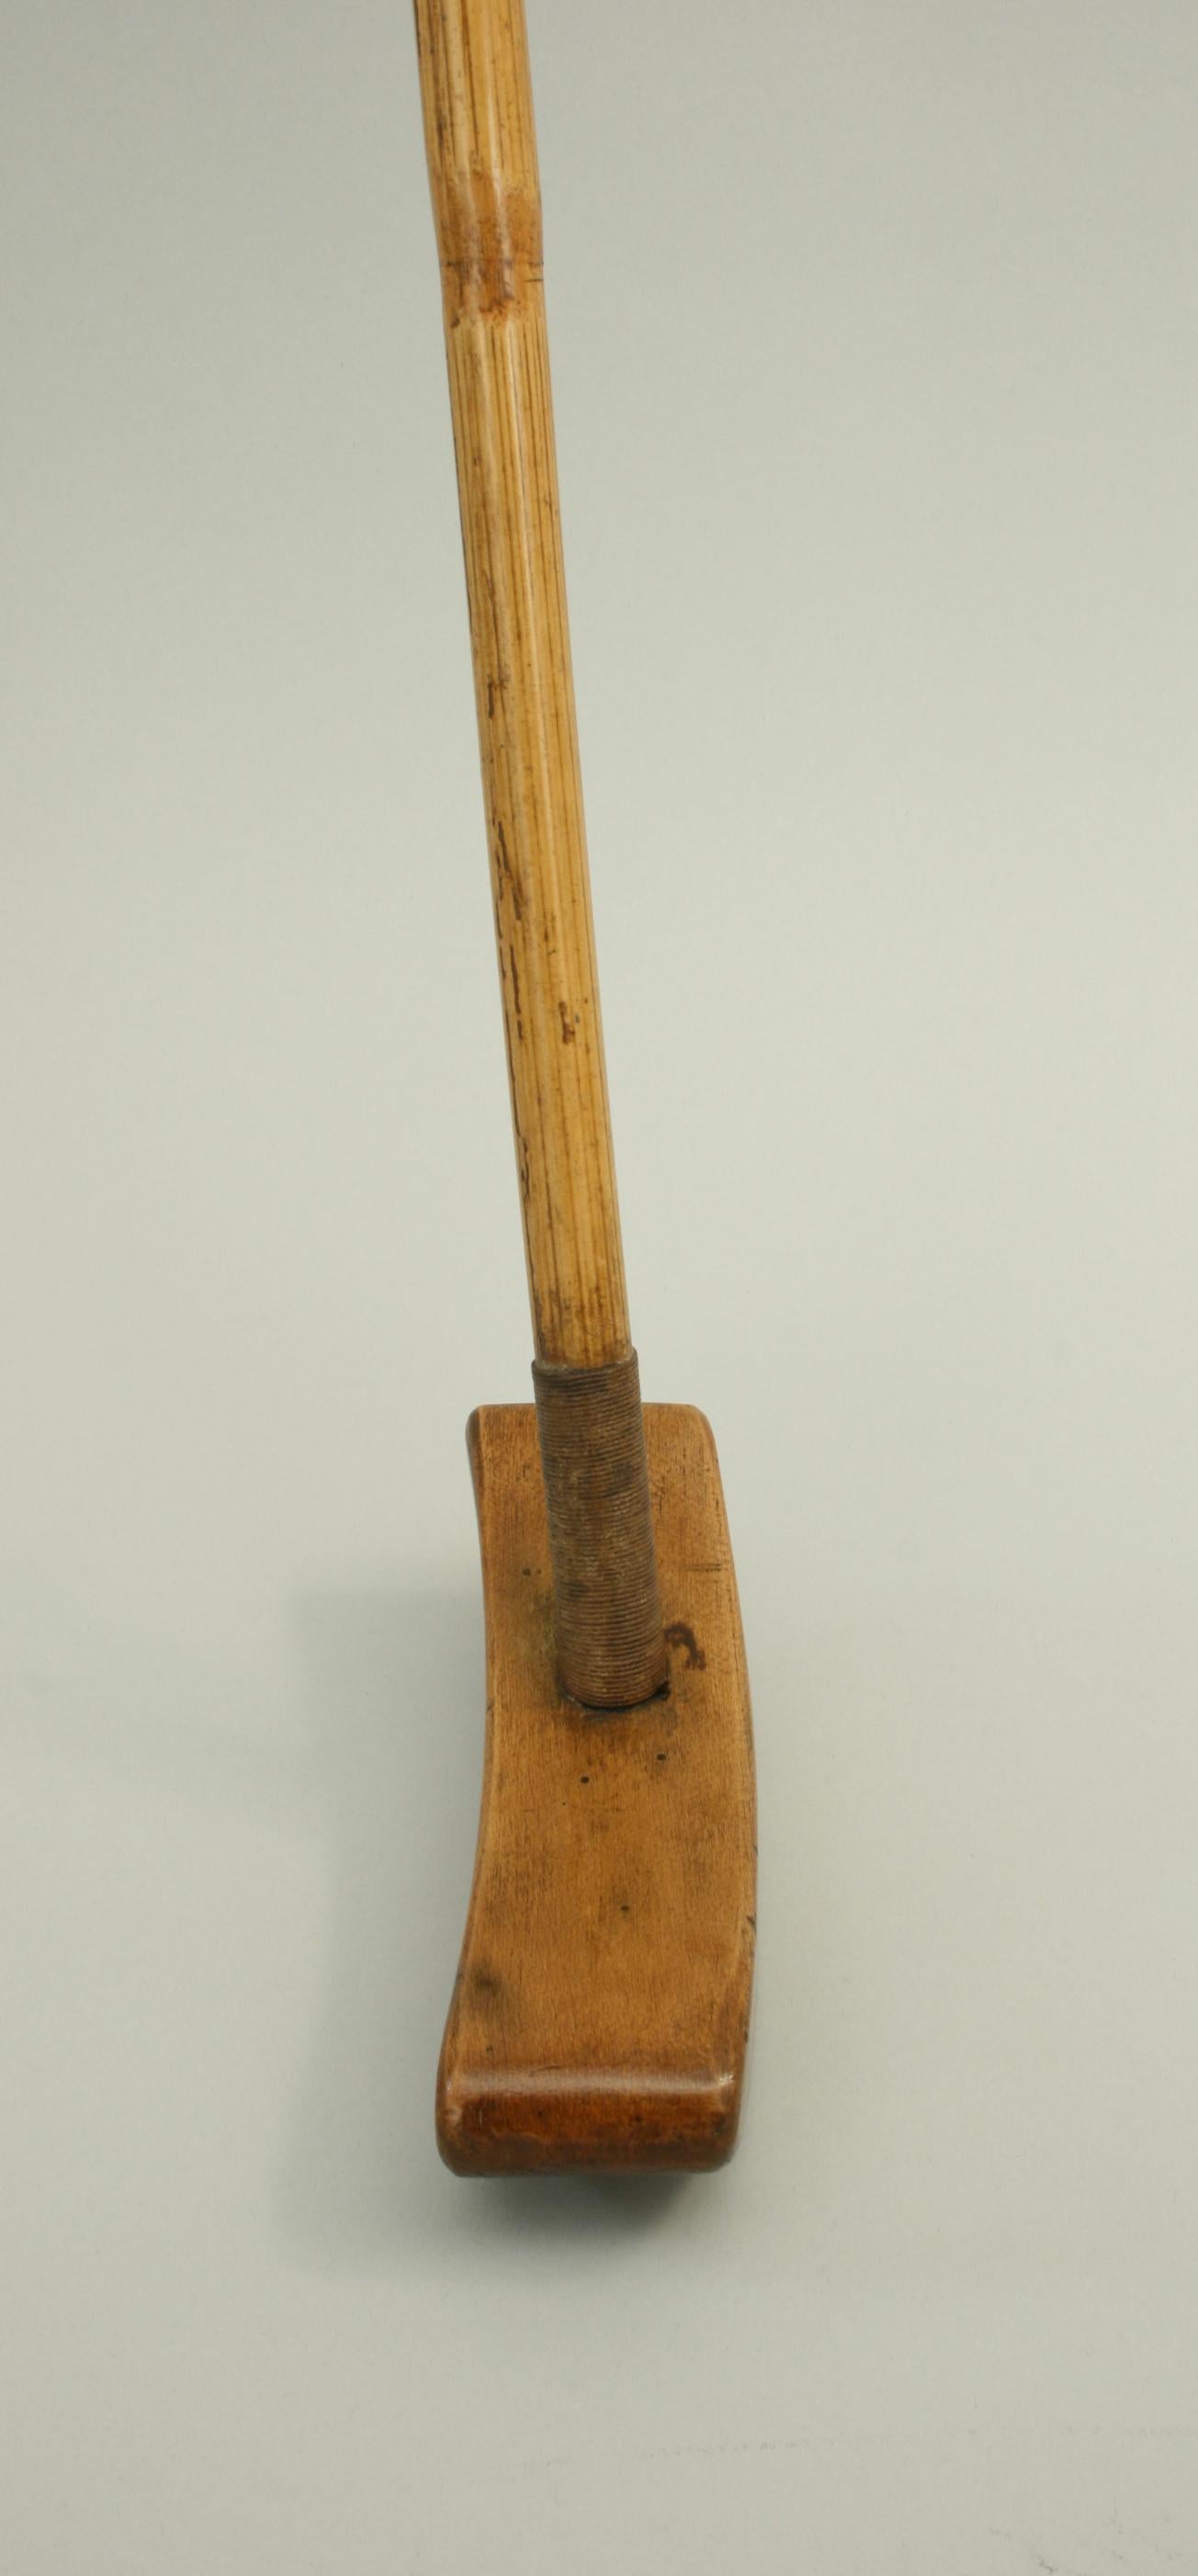 Unusual Bicycle Polo Mallet, Aldershot.

A wonderful bicycle polo mallet, no makers name is visible but J. Salter & Sons of Aldershot announced on their advertisements that they were the 'sole makers for bicycle polo sticks' and that it is 'a